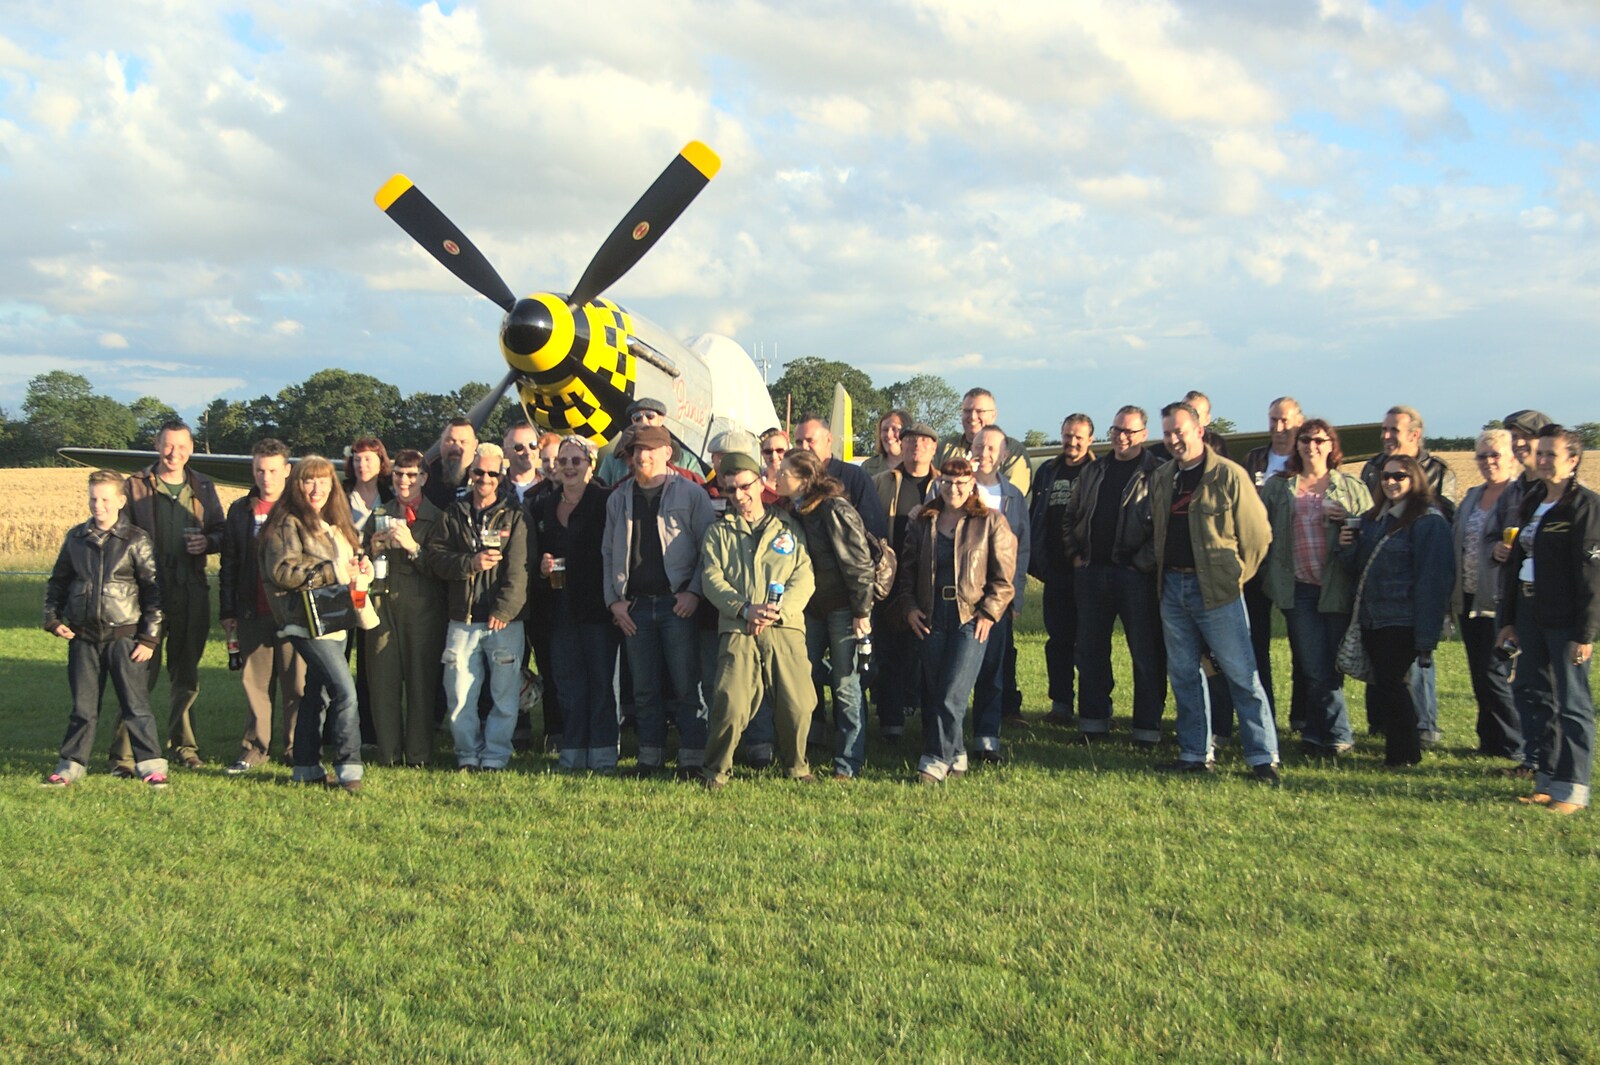 A group of people crowd around Janie for a photo from Maurice's Mustang Hangar Dance, Hardwick Airfield, Norfolk - 16th July 2011